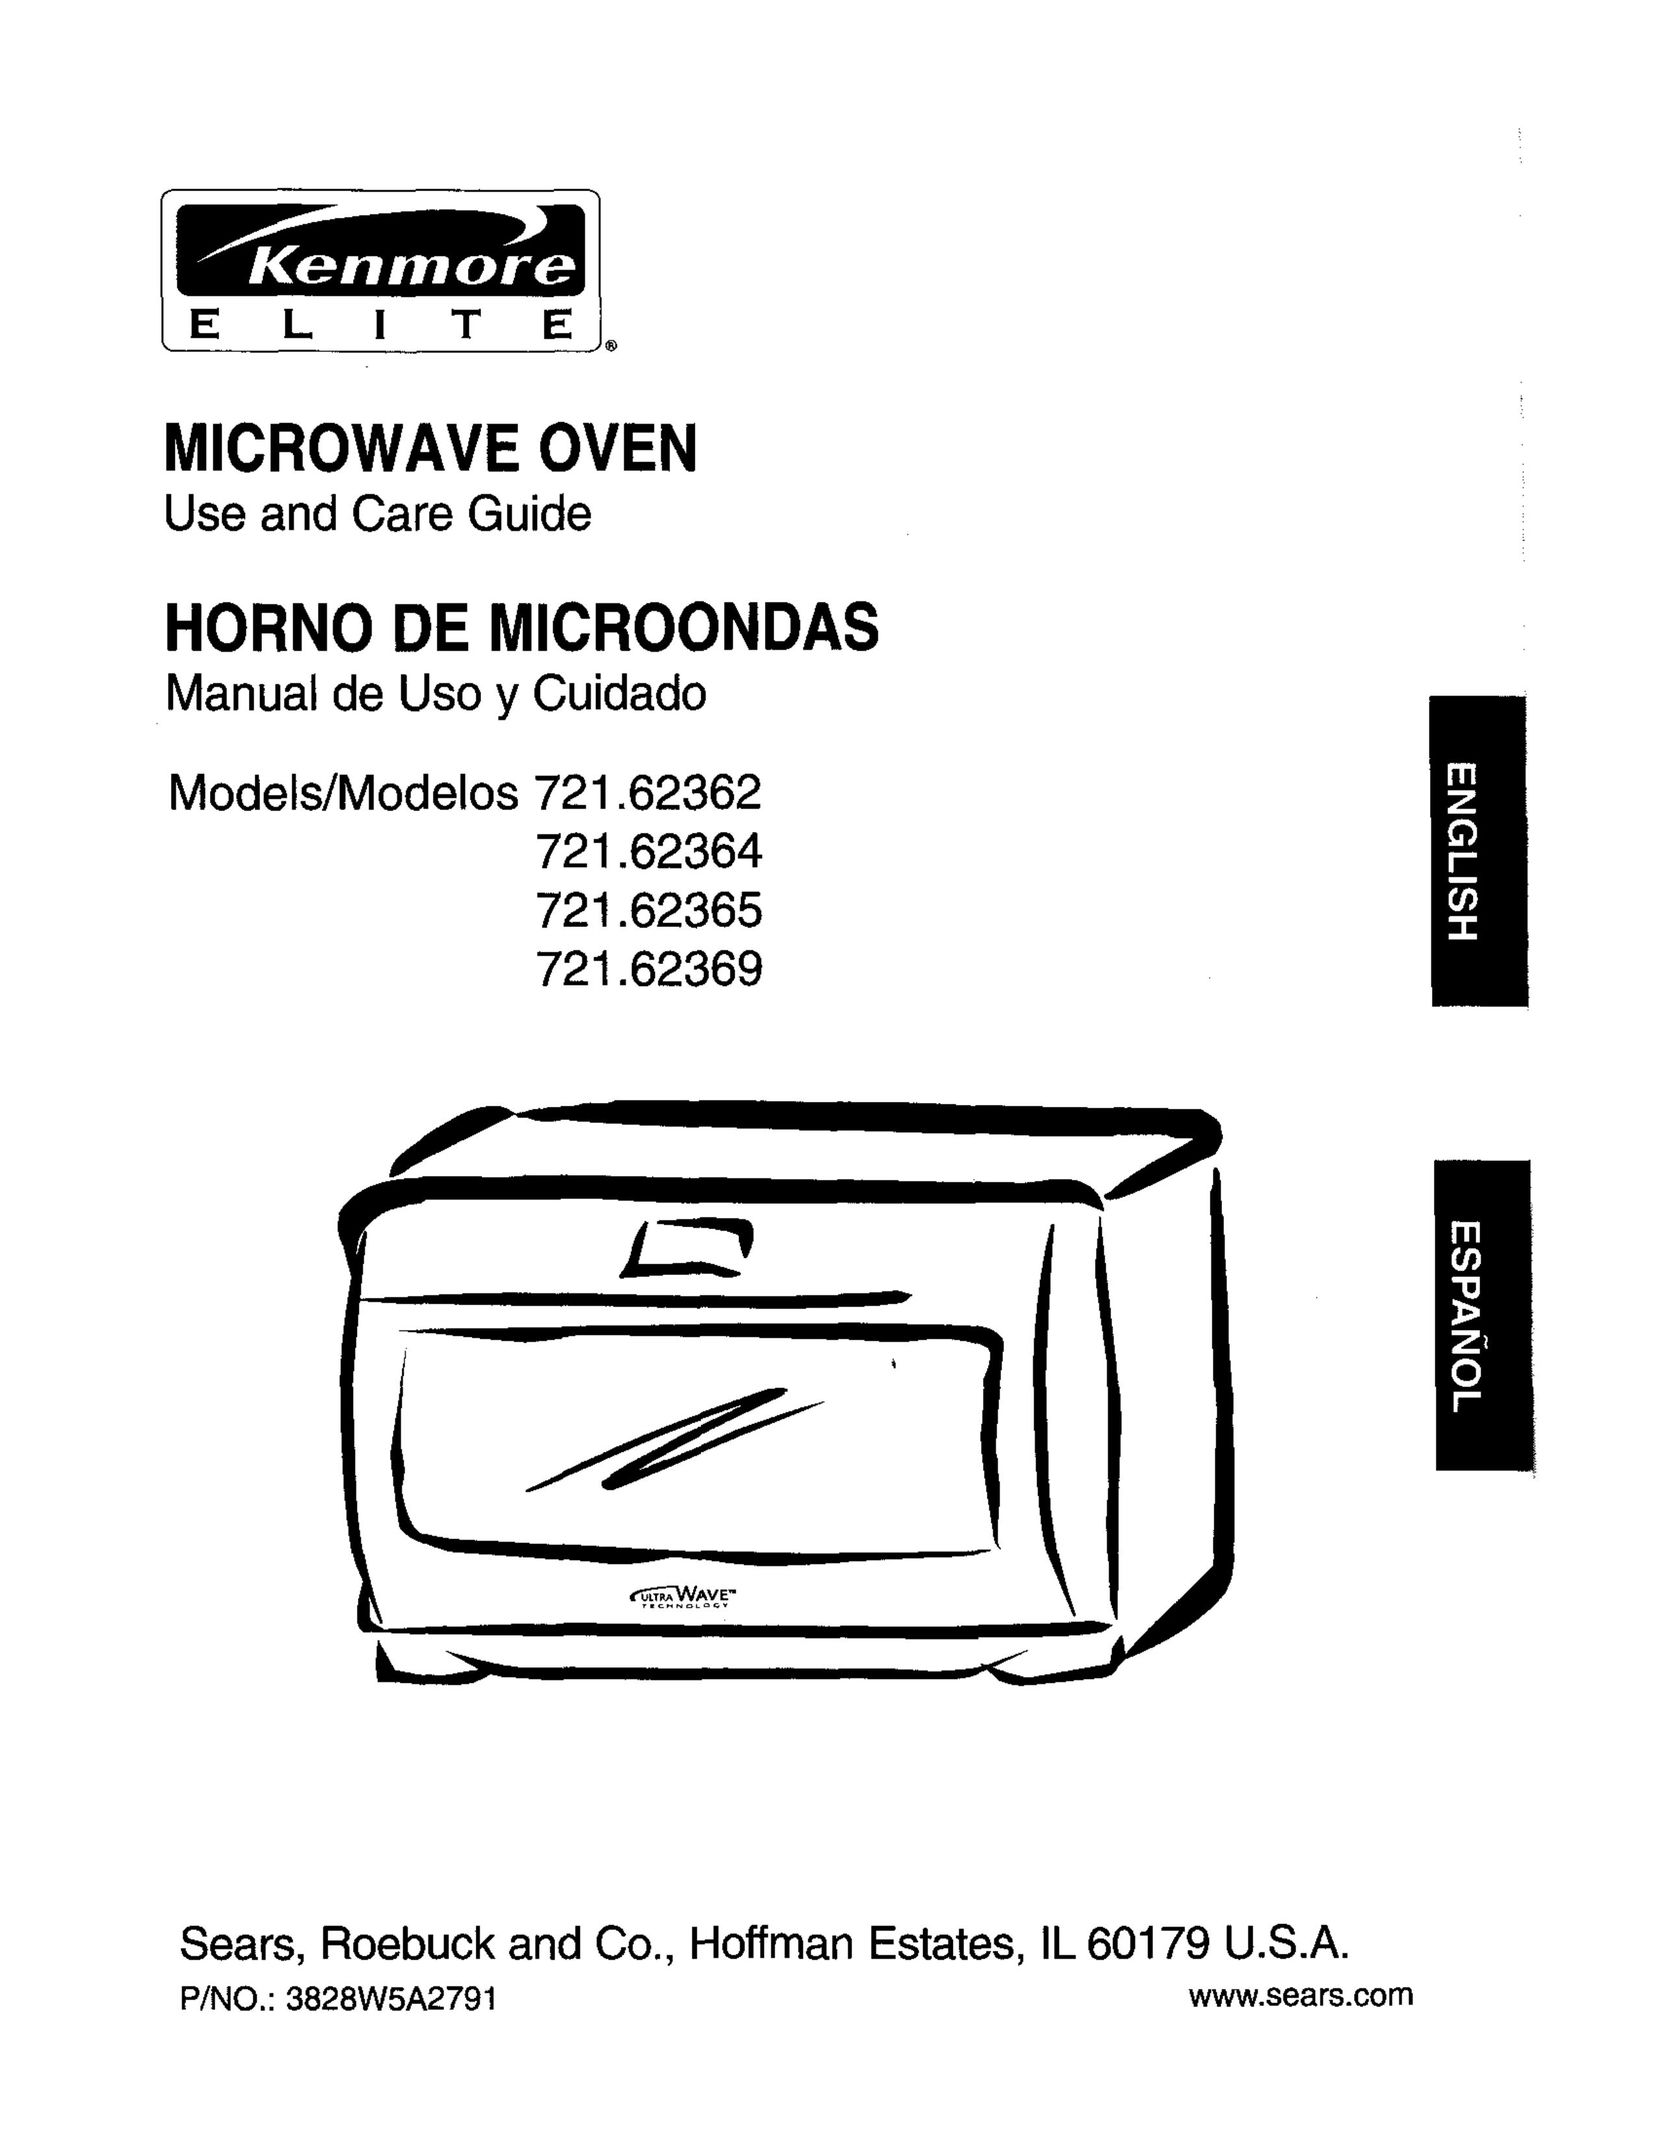 Kenmore 721.62369 Microwave Oven User Manual